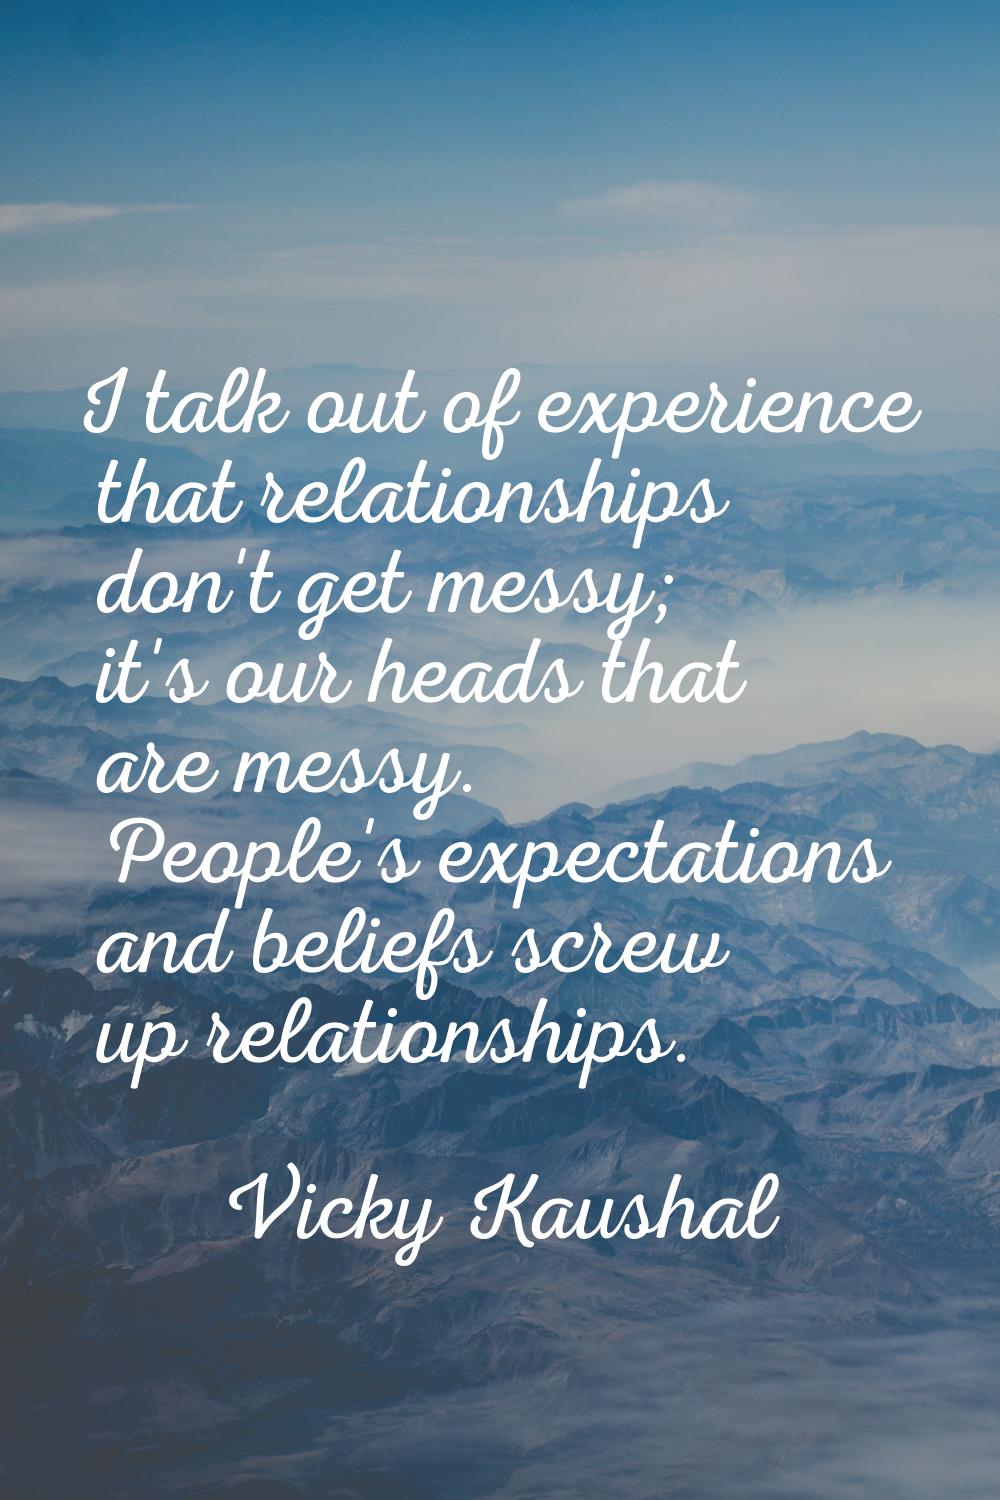 I talk out of experience that relationships don't get messy; it's our heads that are messy. People'